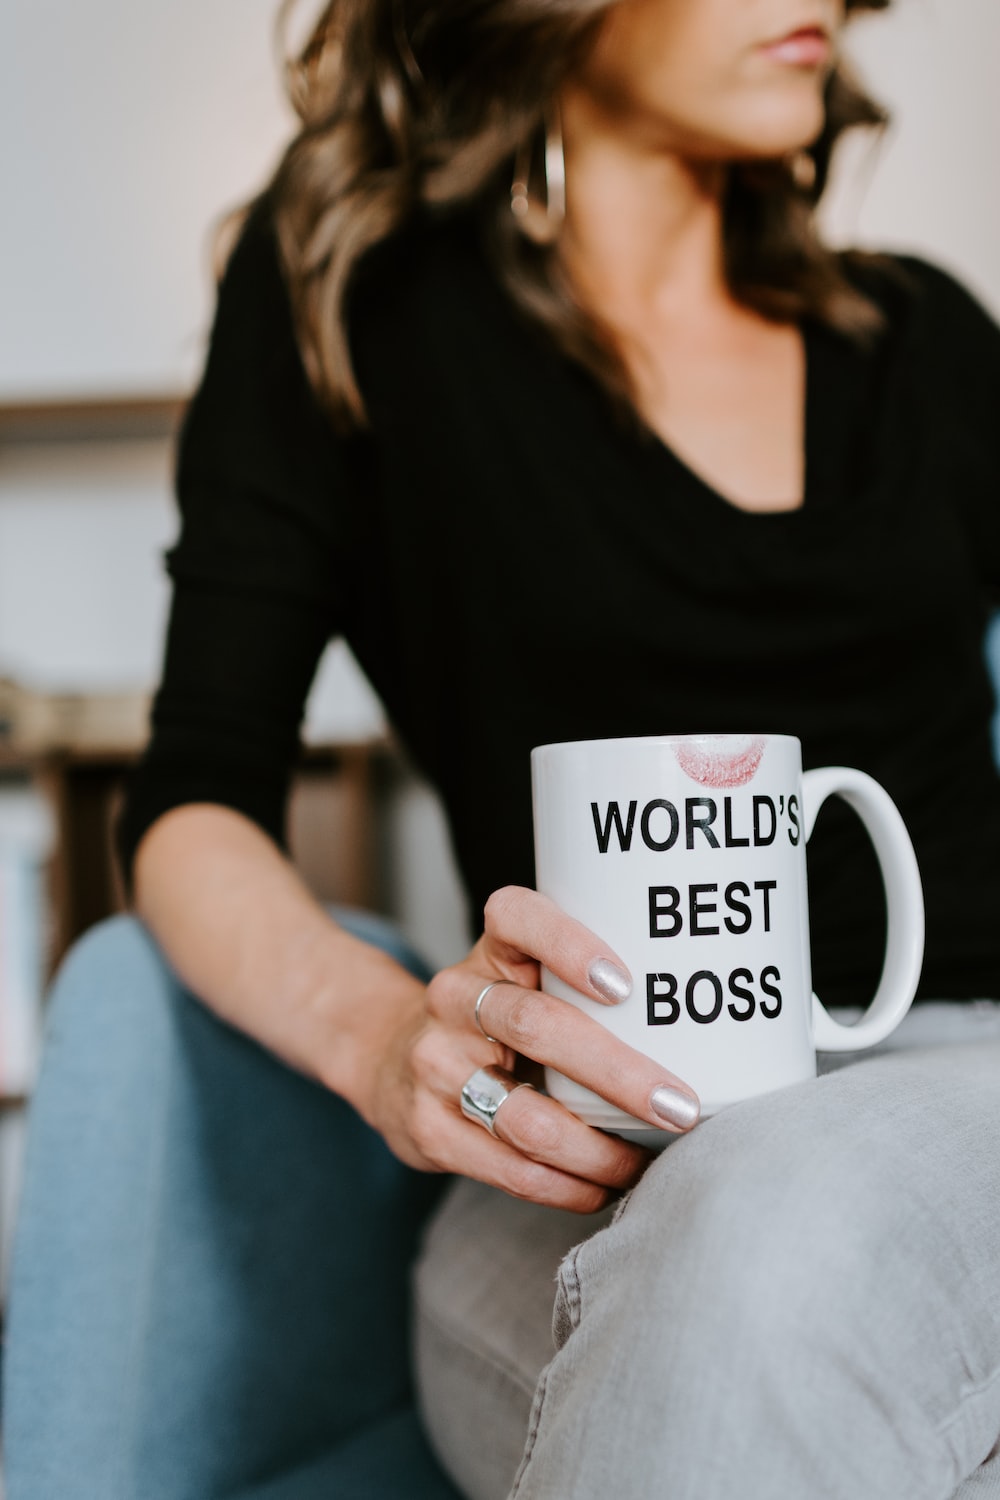 Boss Lady Picture [HD]. Download Free Image